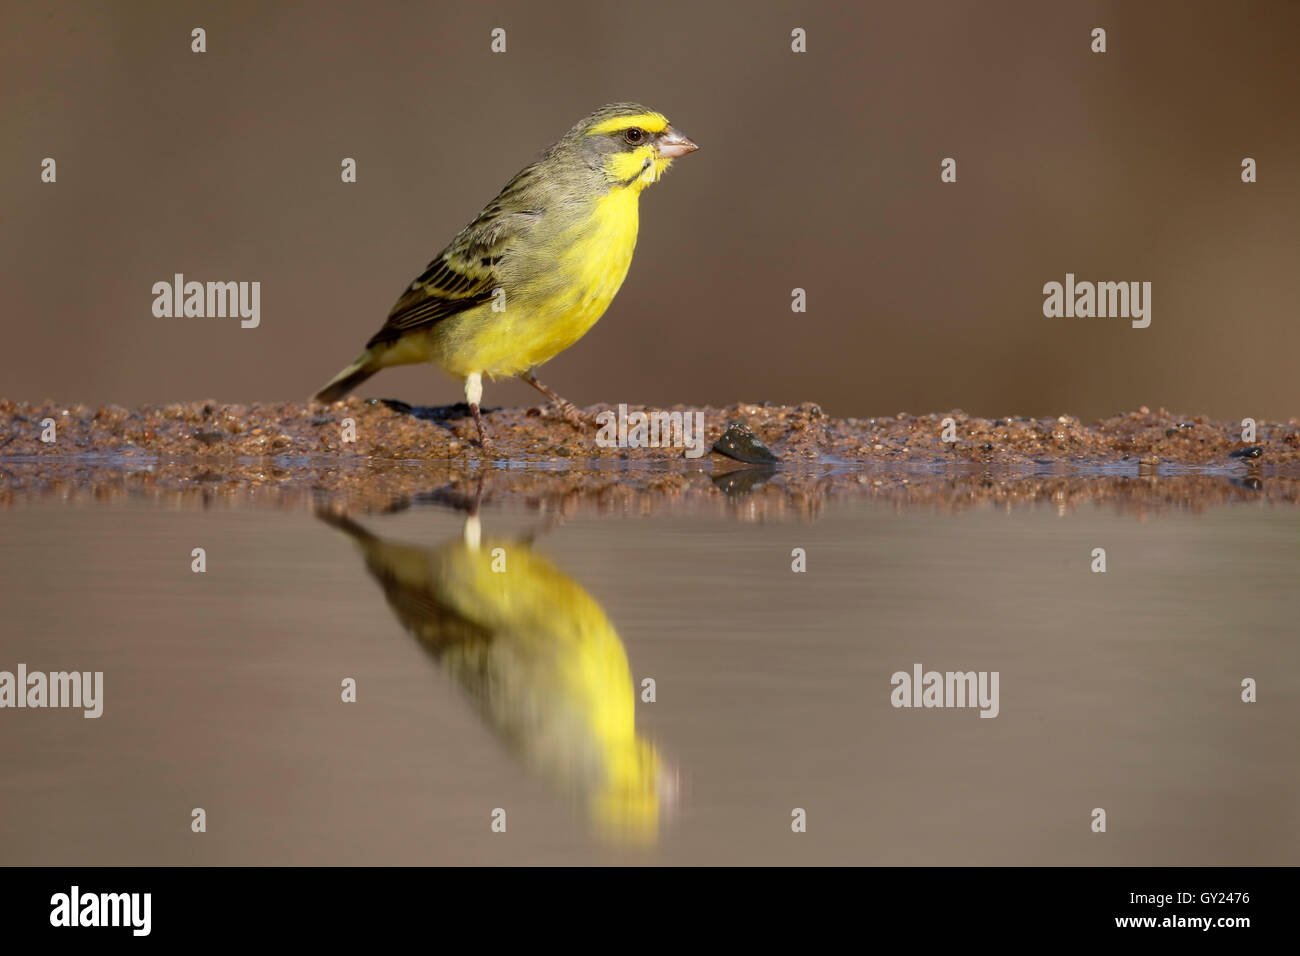 Yellow-eyed canary, Crithagra mozambicus, single bird by water, South ...